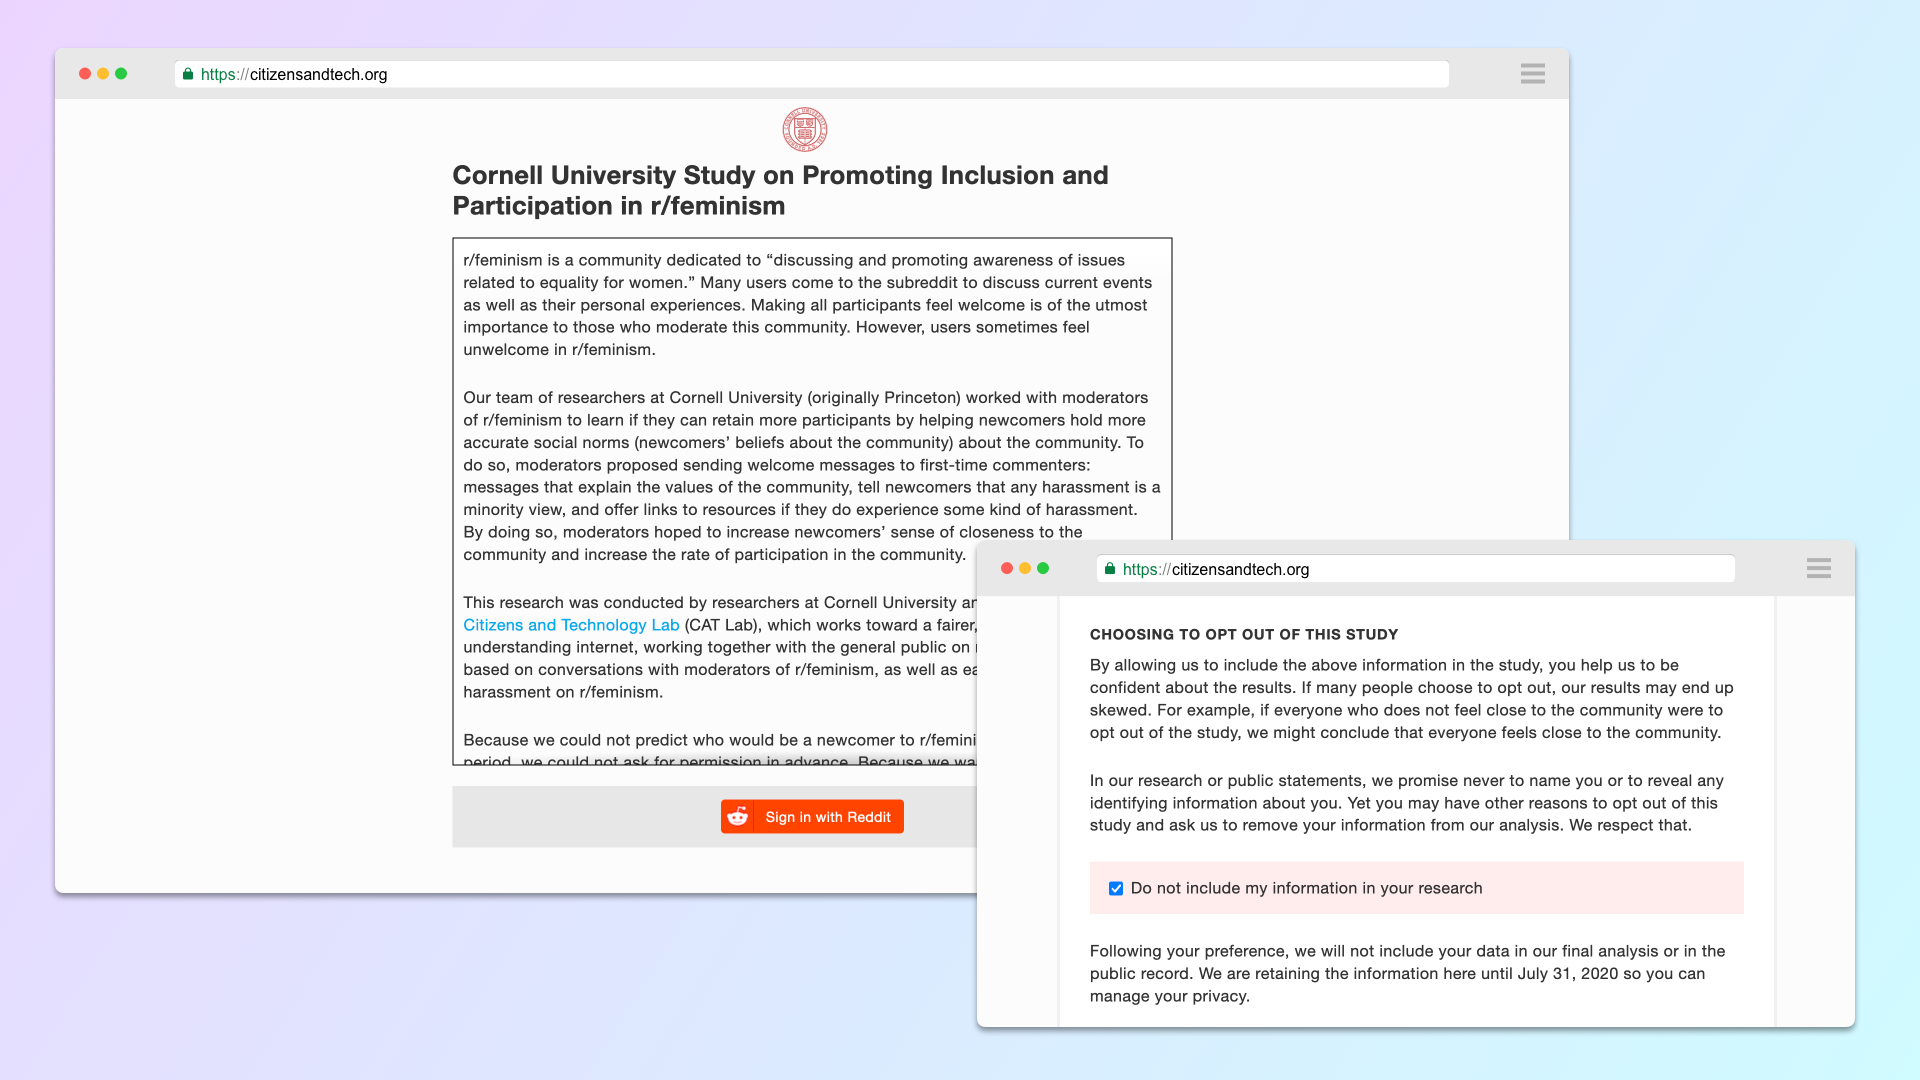 A screenshot of Bartleby's interface showing information about a Cornell study on Promoting Inclusion and Participation on r/feminism. There is a button to log in with reddit. A pop-out window shows a checkbox allowing users to opt out of data collection.